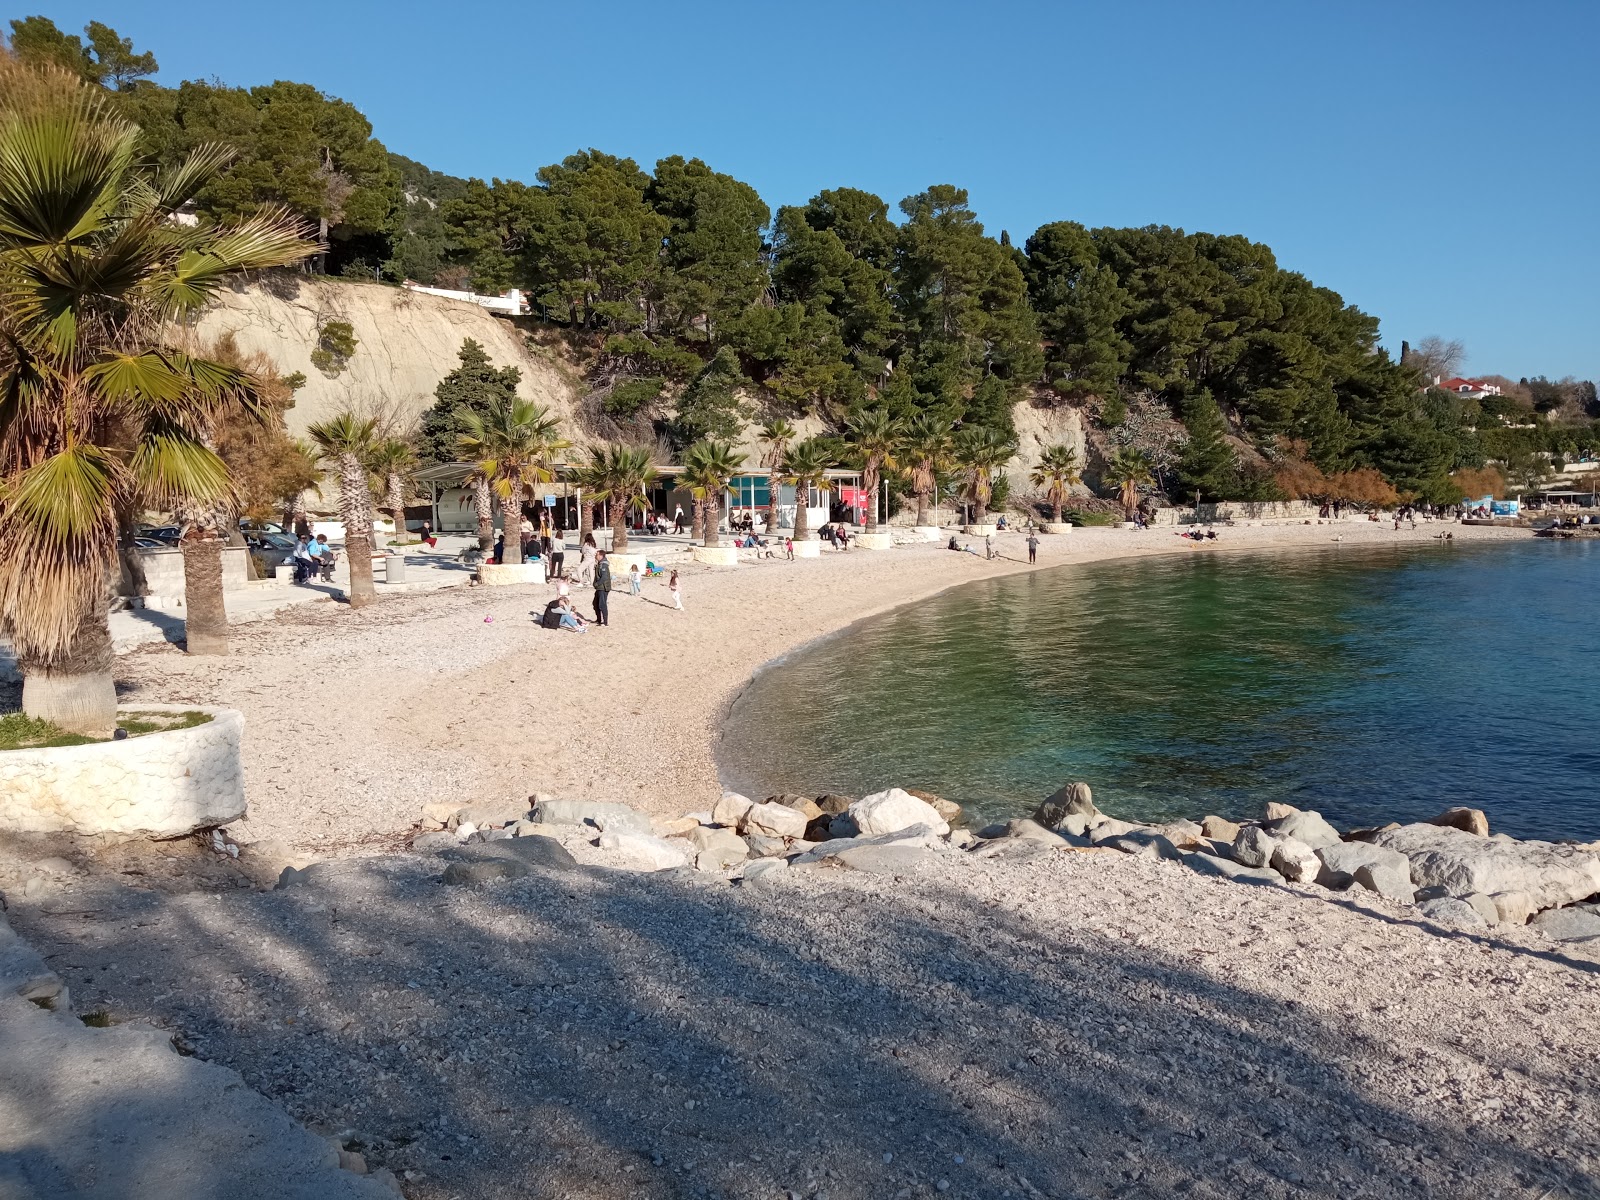 Photo of Obojena beach - popular place among relax connoisseurs